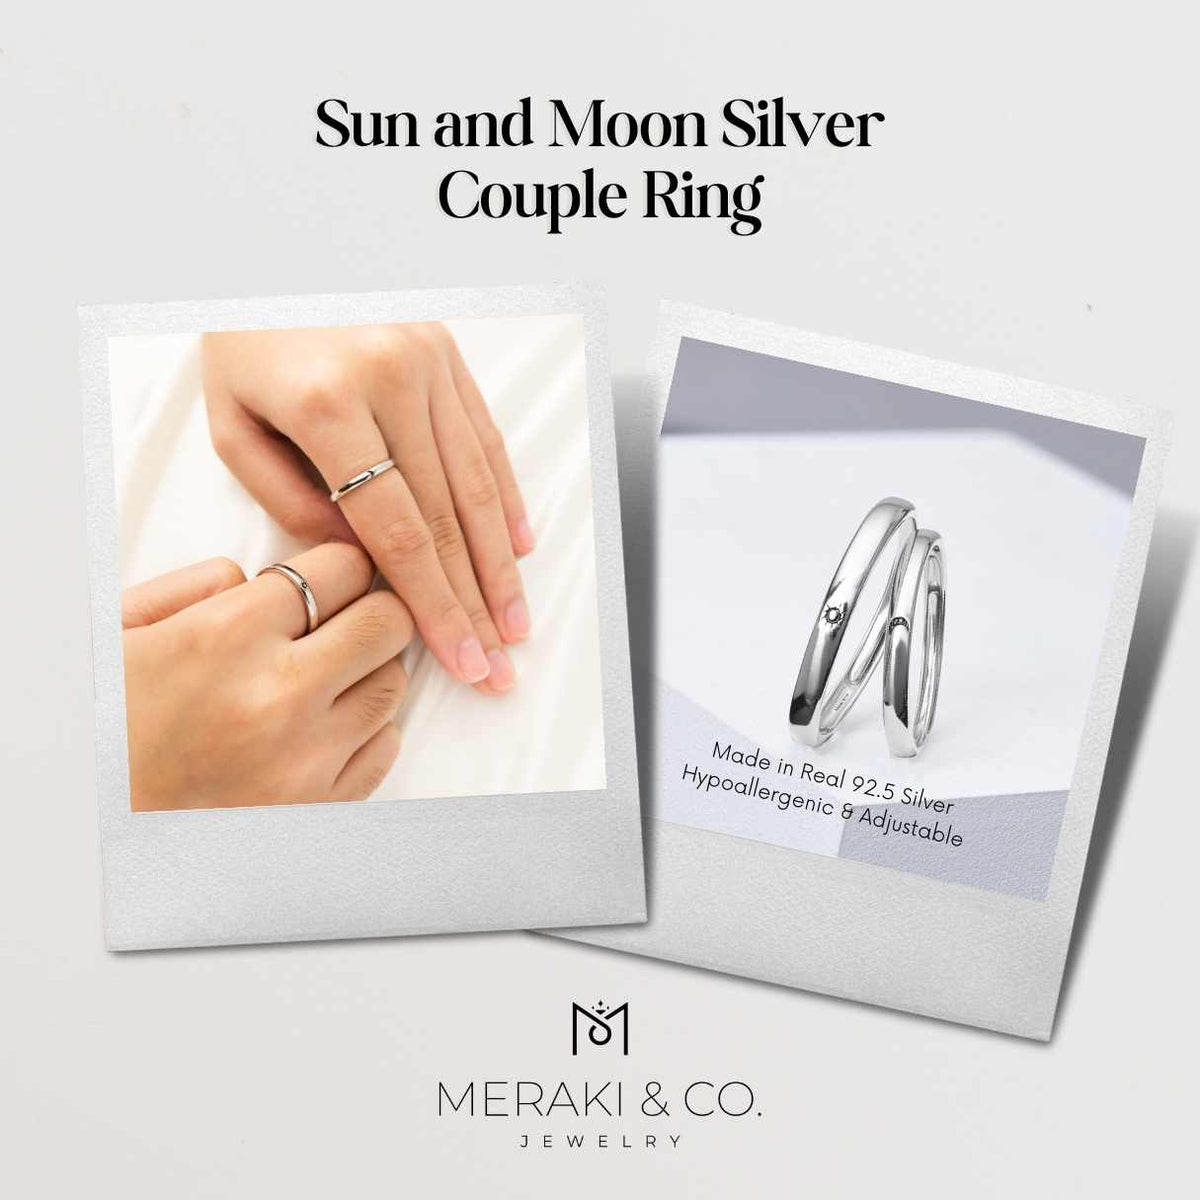 Sun and Moon Couple Ring (Real Silver & Adjustable)